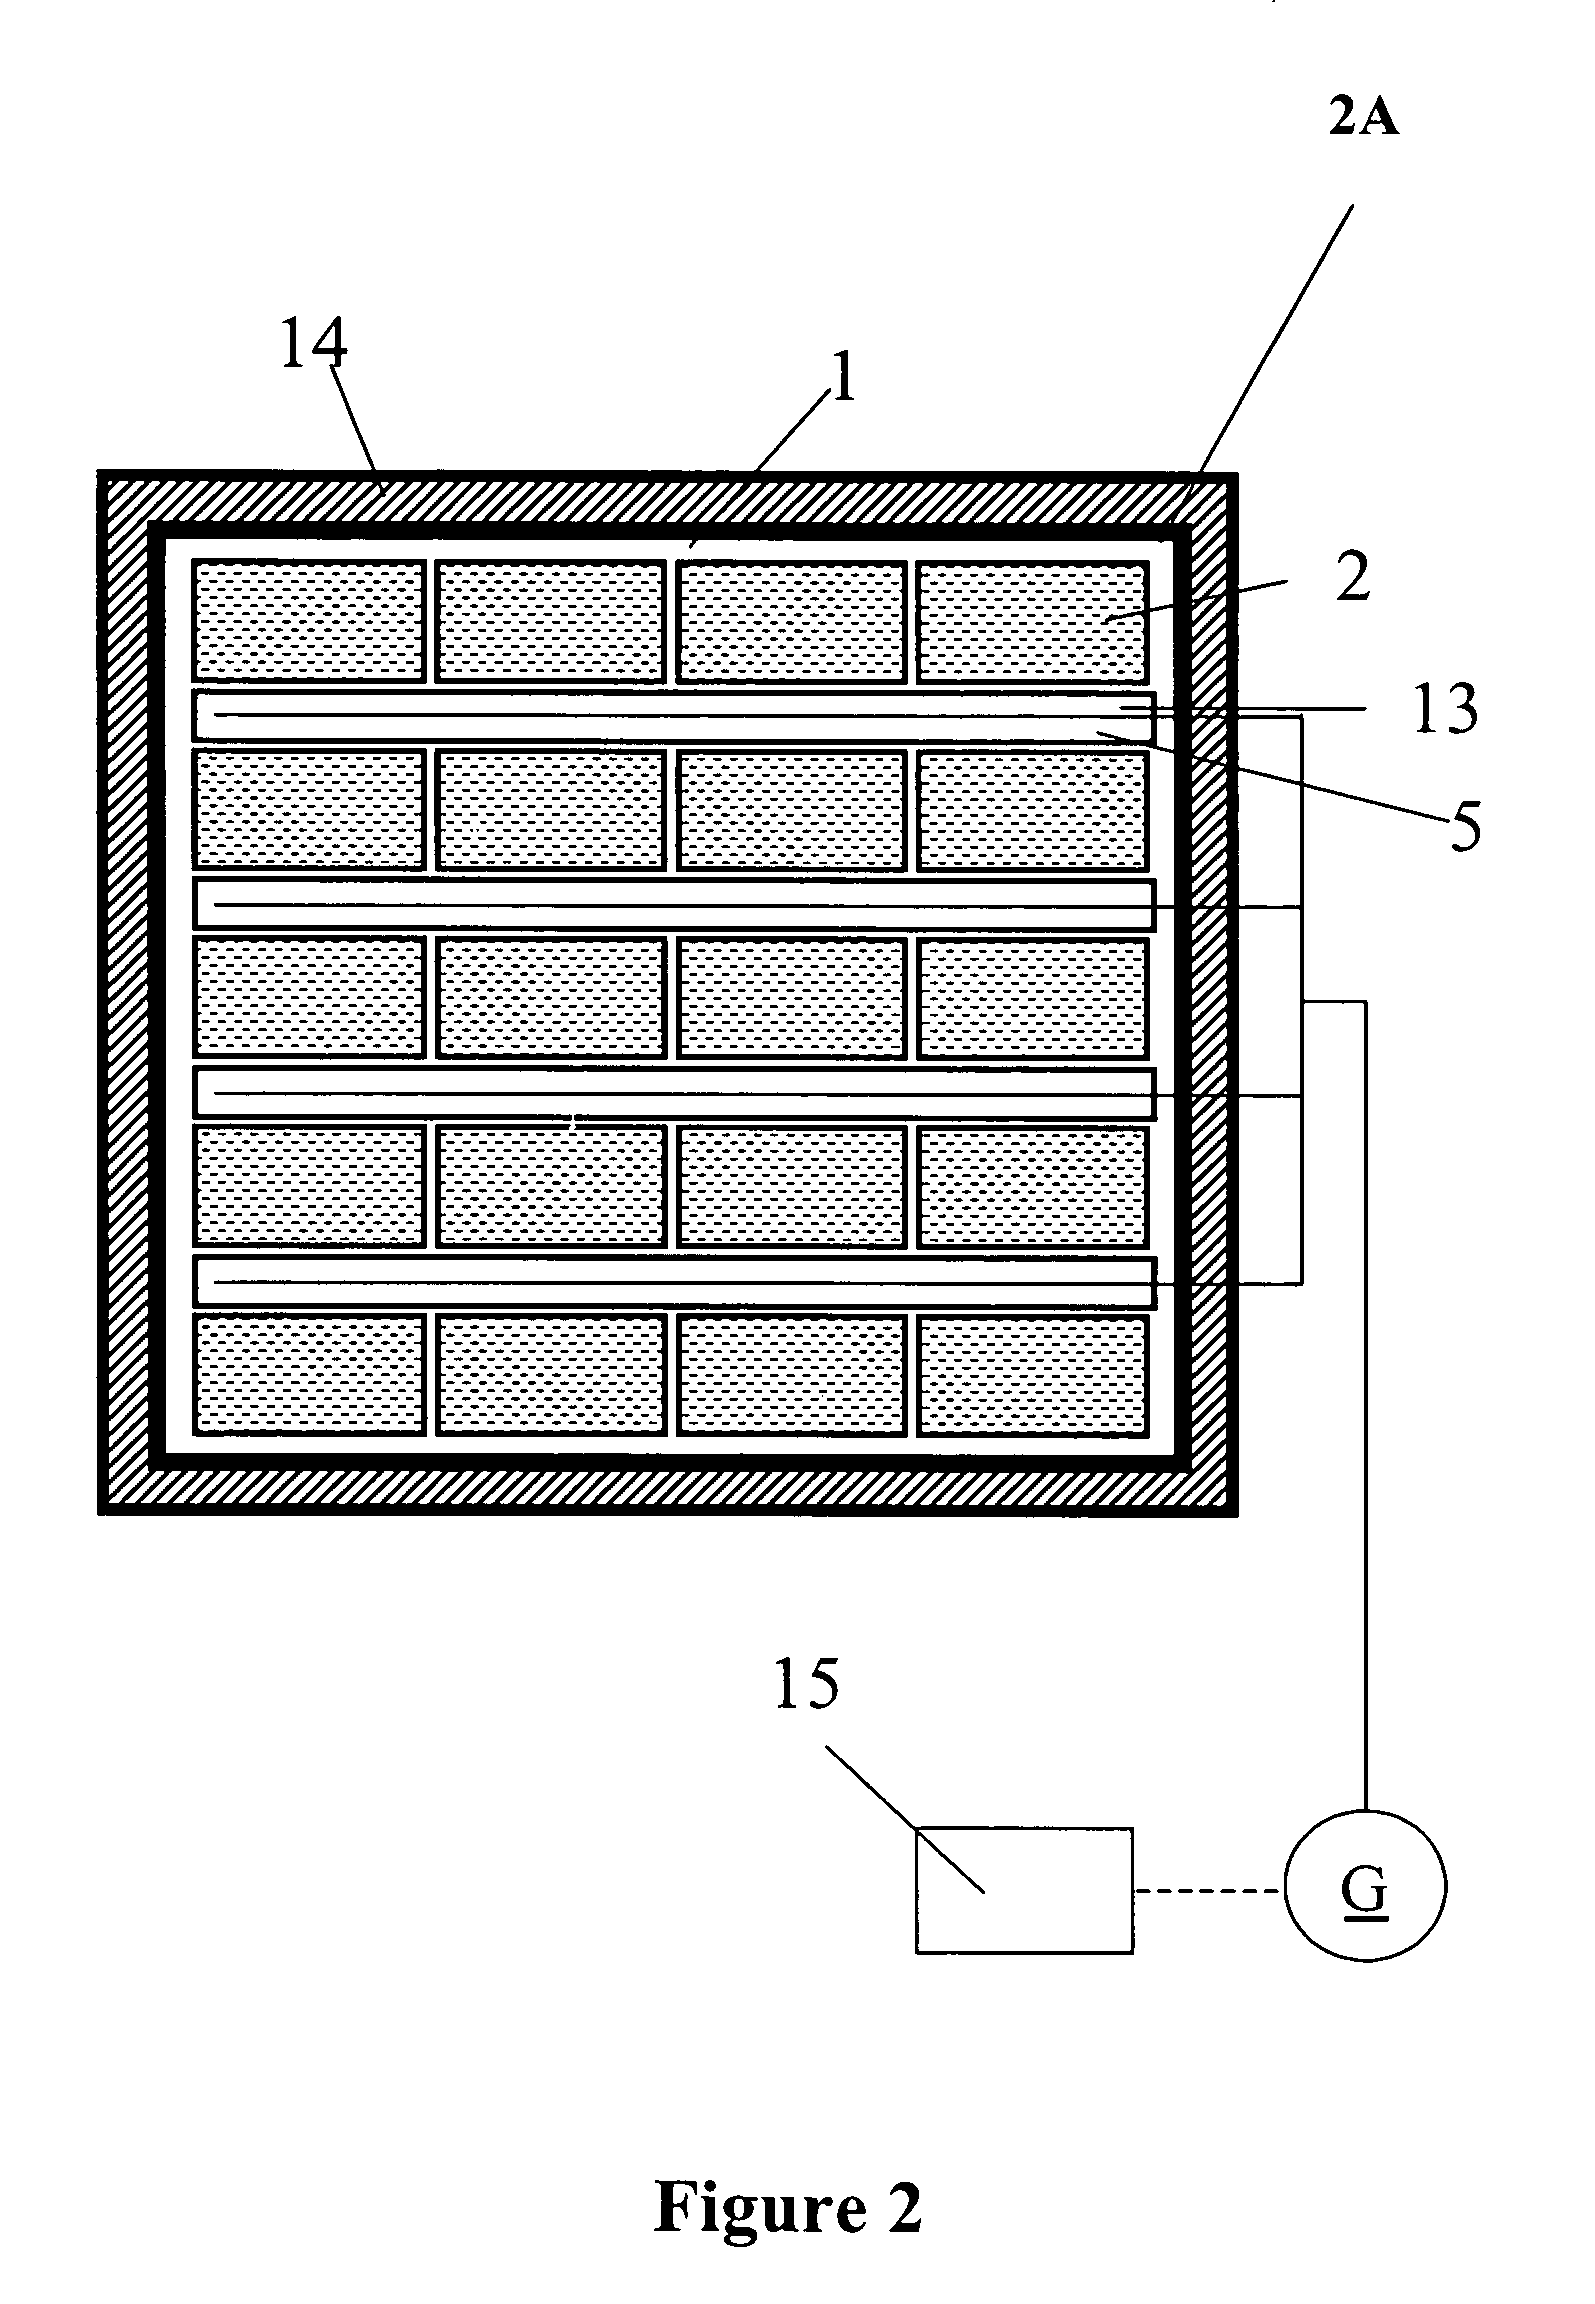 Heating system for use in on-board kitchens in means of transport and a method for heating food on board means of transport, in particular aircraft